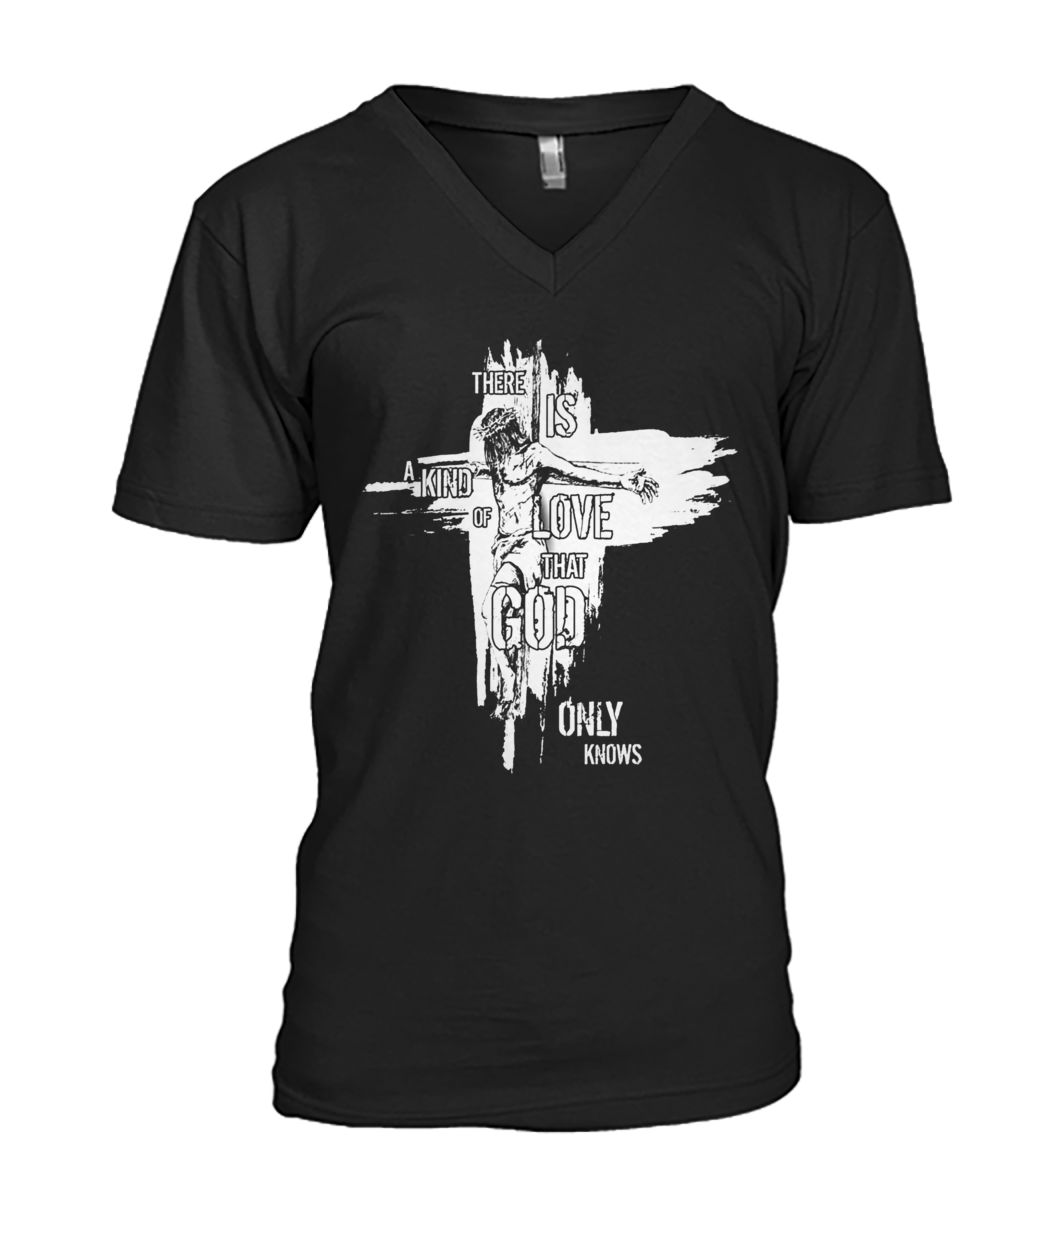 There is a kind of love that god only knows faith cross mens v-neck